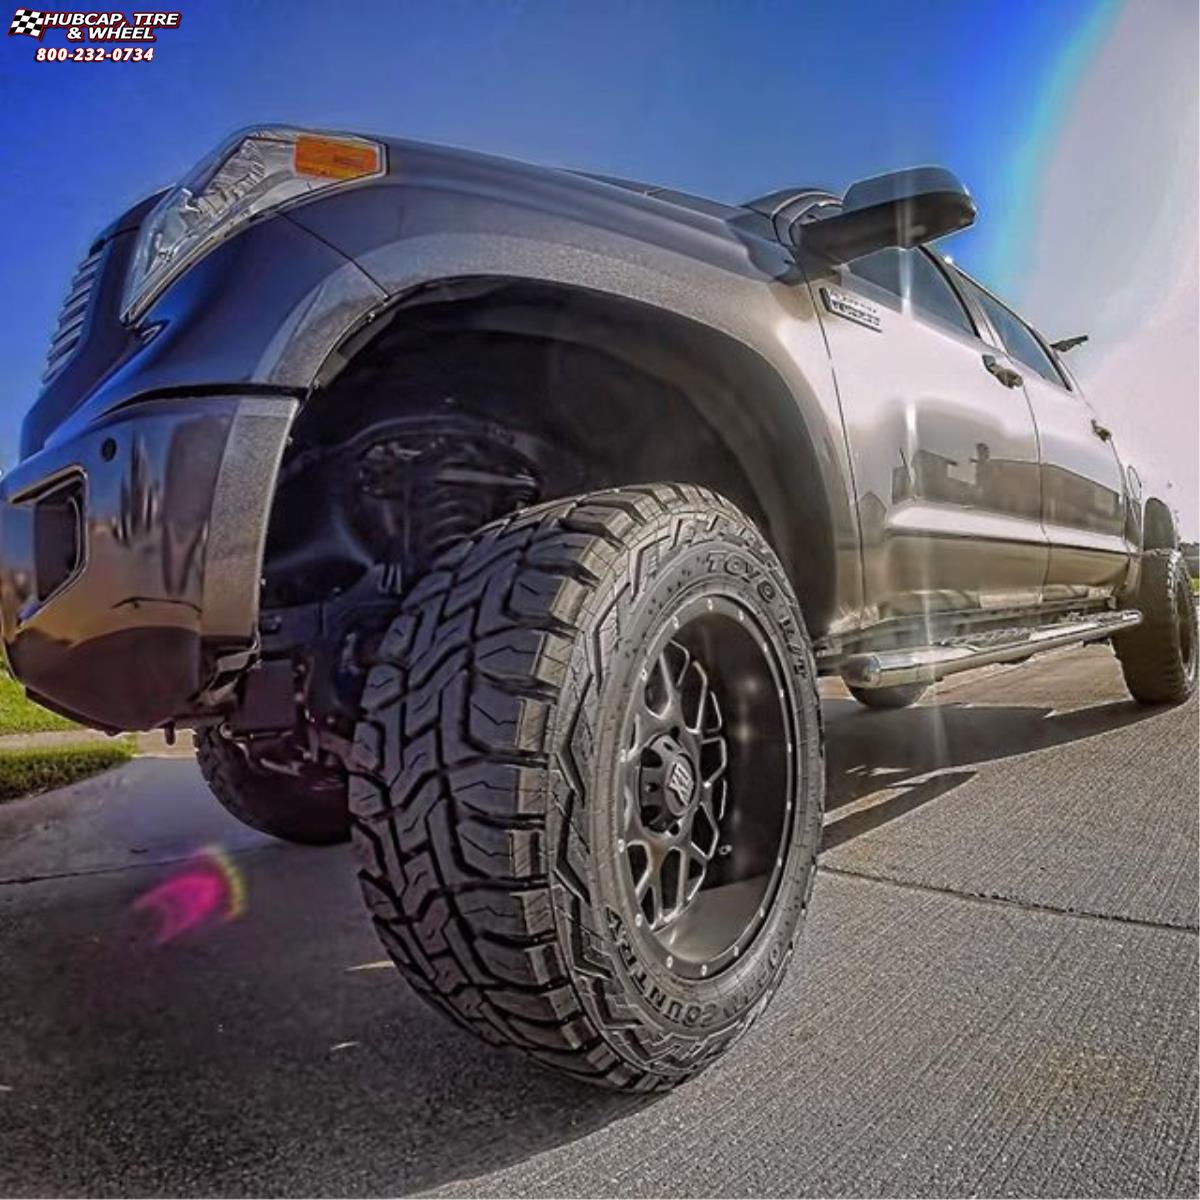 vehicle gallery/2015 toyota tundra xd series xd820 grenade  Satin Black Milled wheels and rims